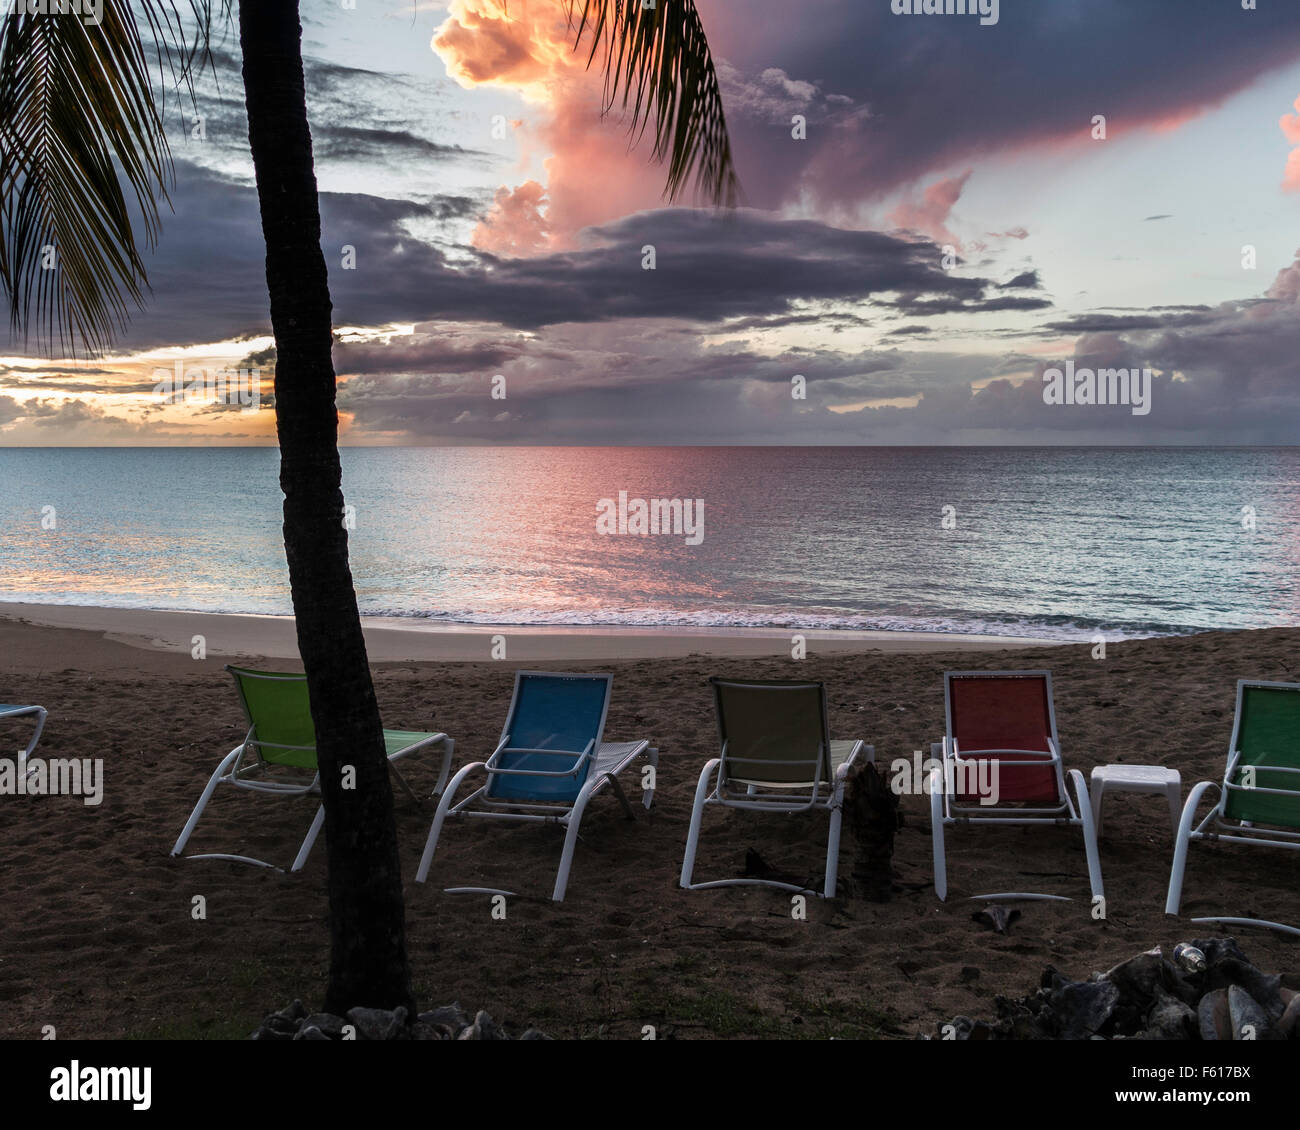 A beautiful sunset showing the beach and beach chairs at a resort in St. Croix, U.S. Virgin Islands. Stock Photo